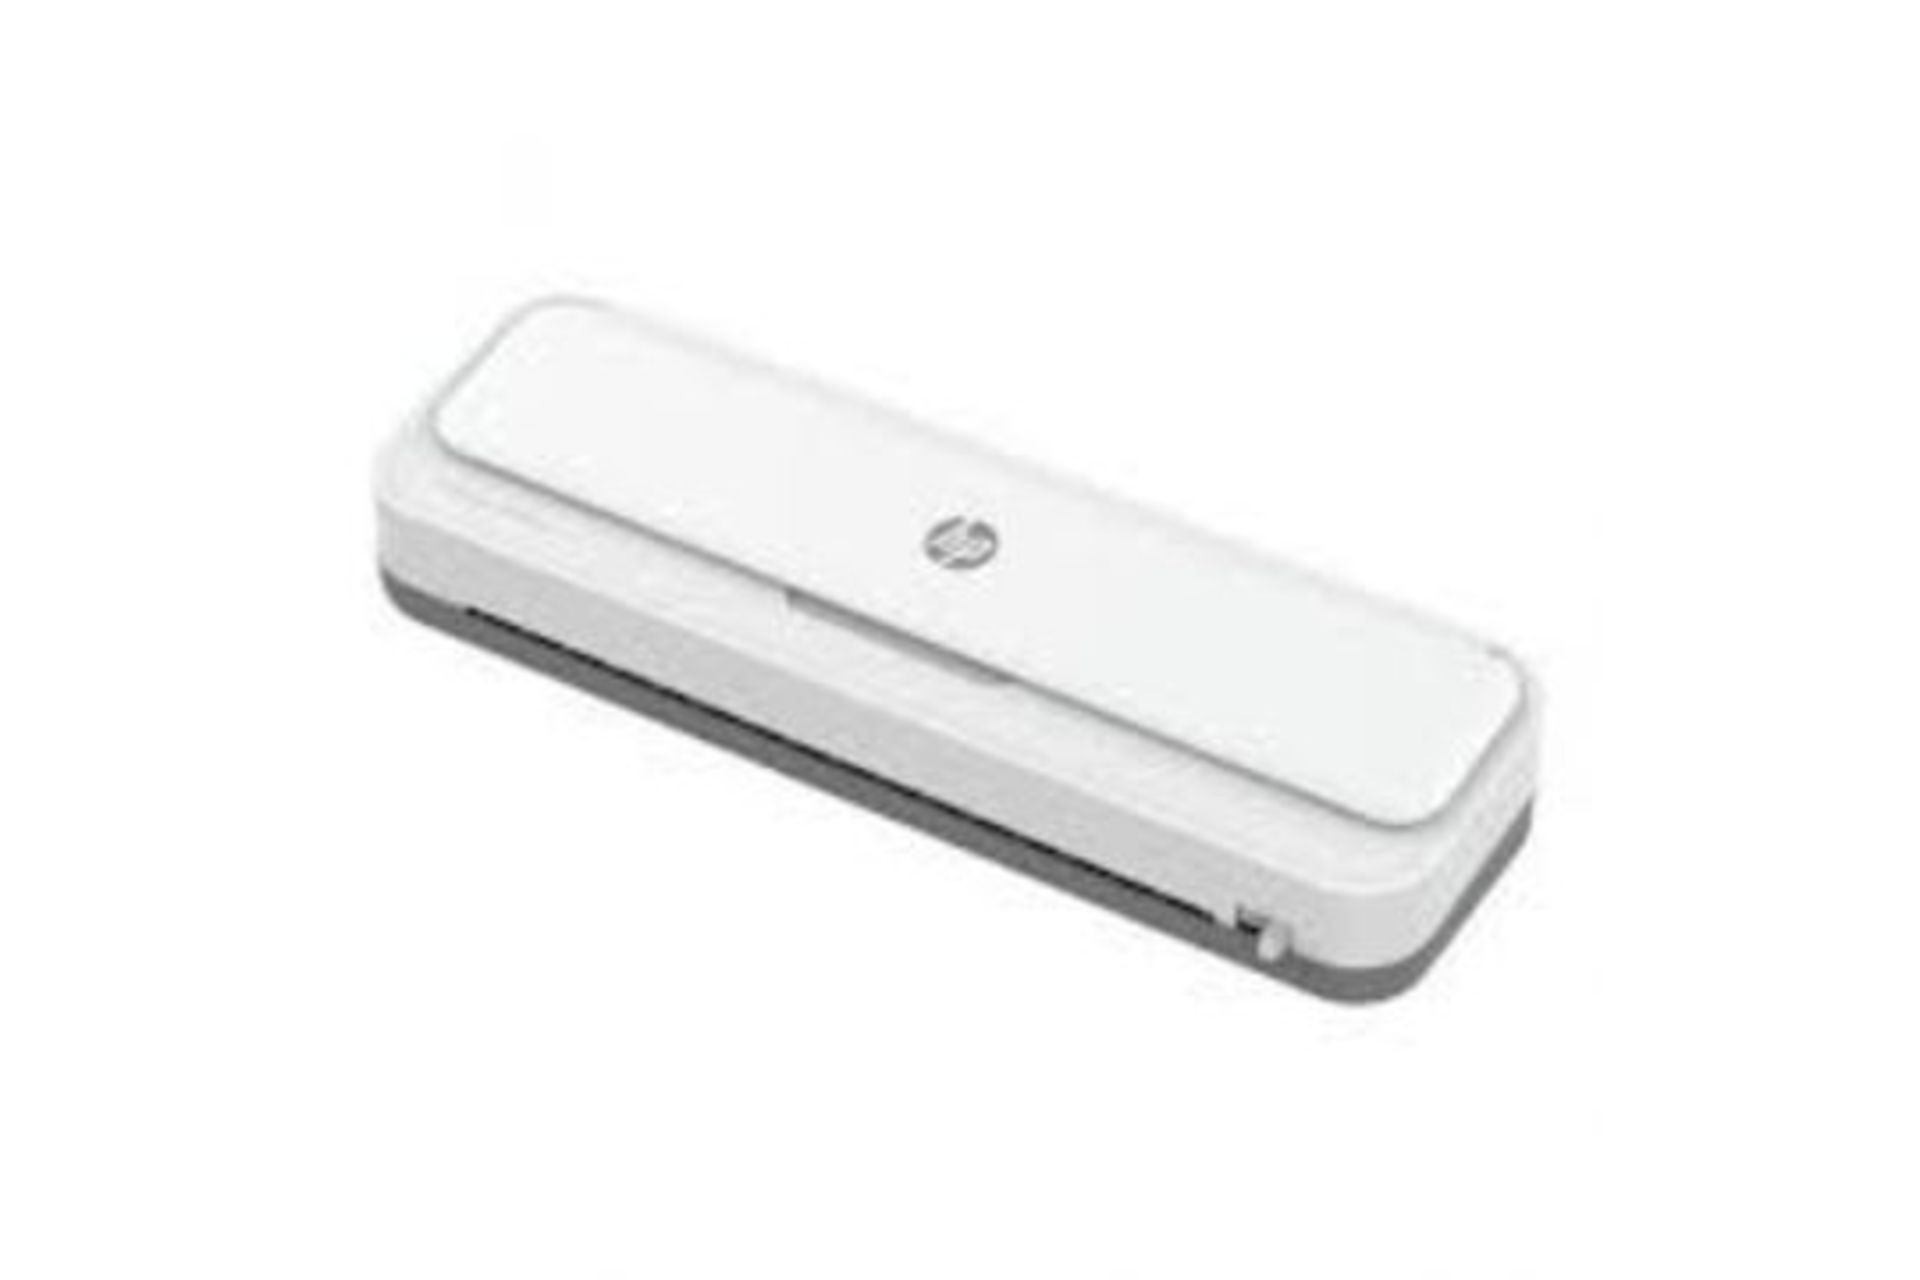 HP OneLam 400 A3 Laminator 3161. - PW. RRP £134.00. HP OneLam 400 A3 Laminator 3161 The compact